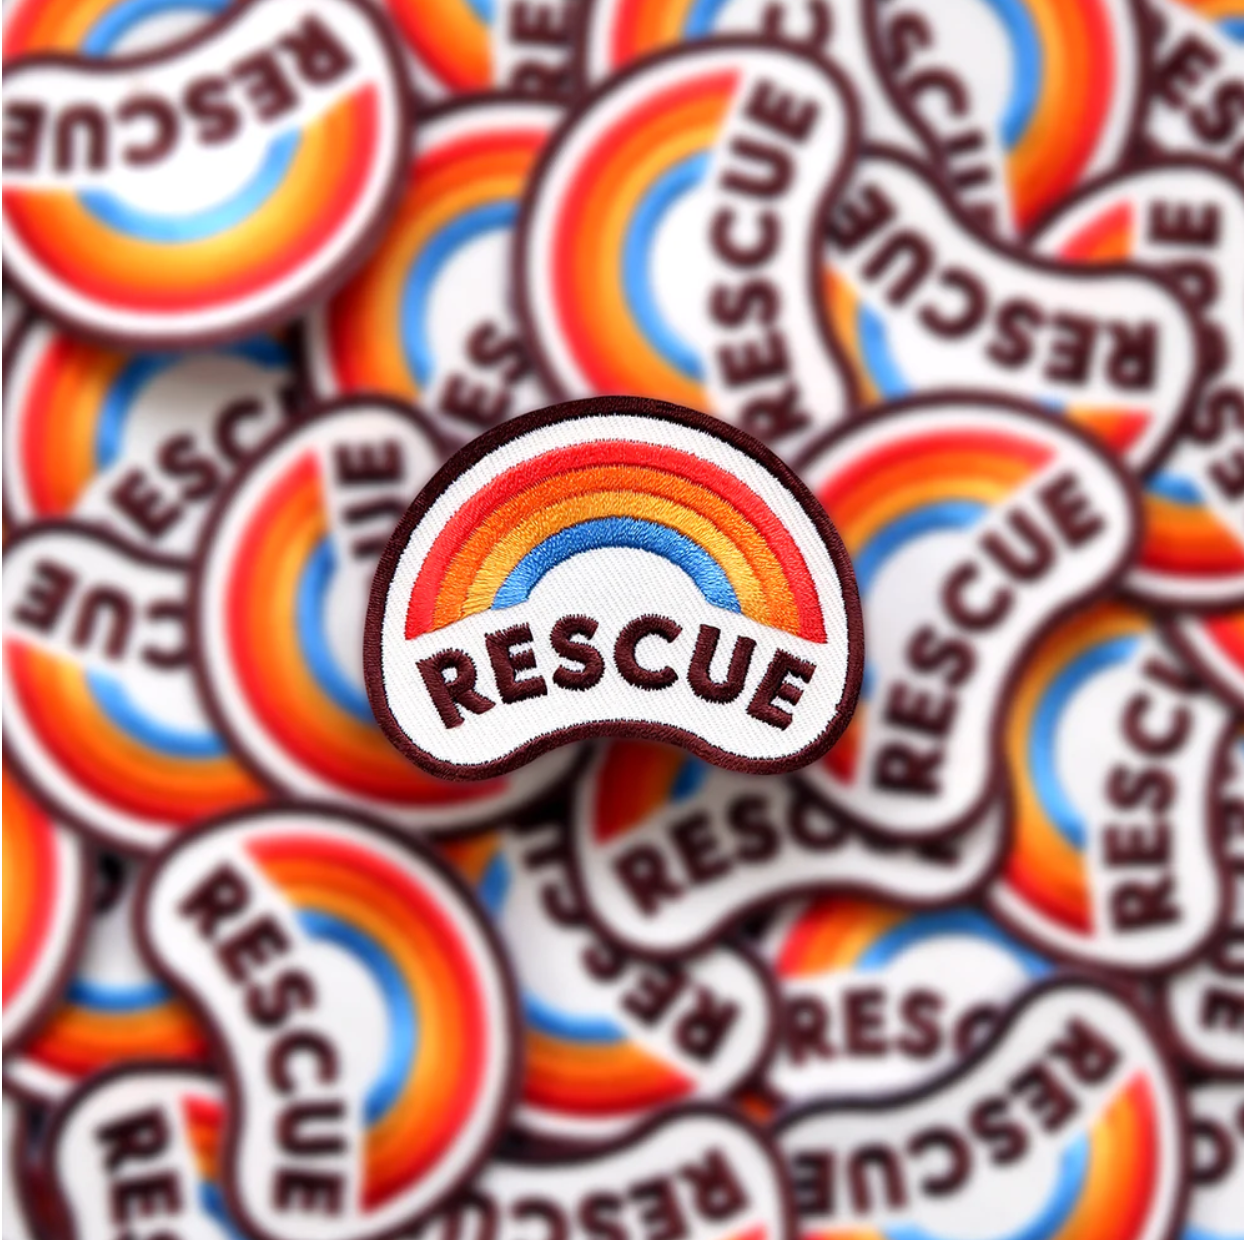 rescue dog embroidered patch for dogs by Scouts honour, funny dog patch, patch for dog bandana, rescue dog gift.